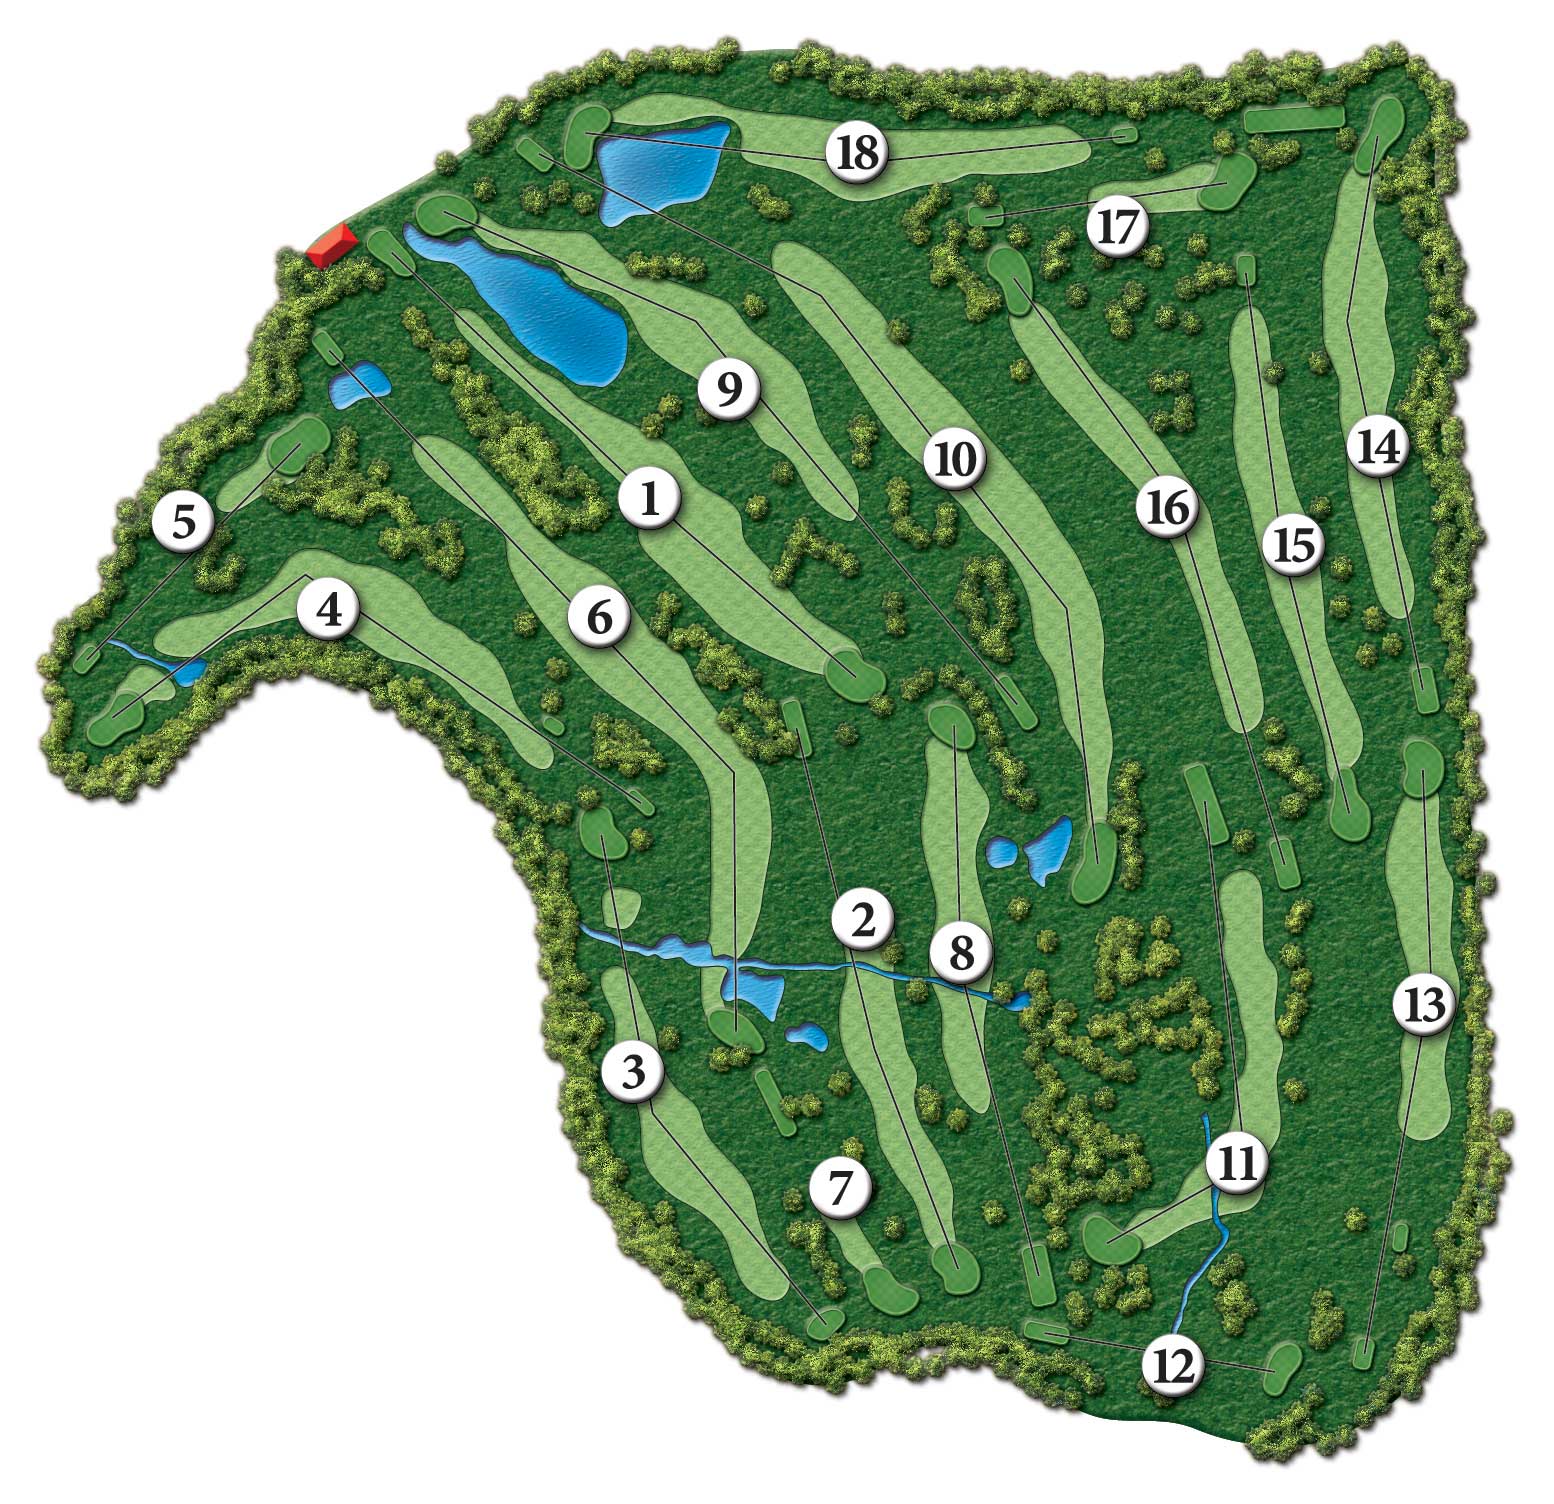 Image of the Course Map for Tamarack Golf Club.